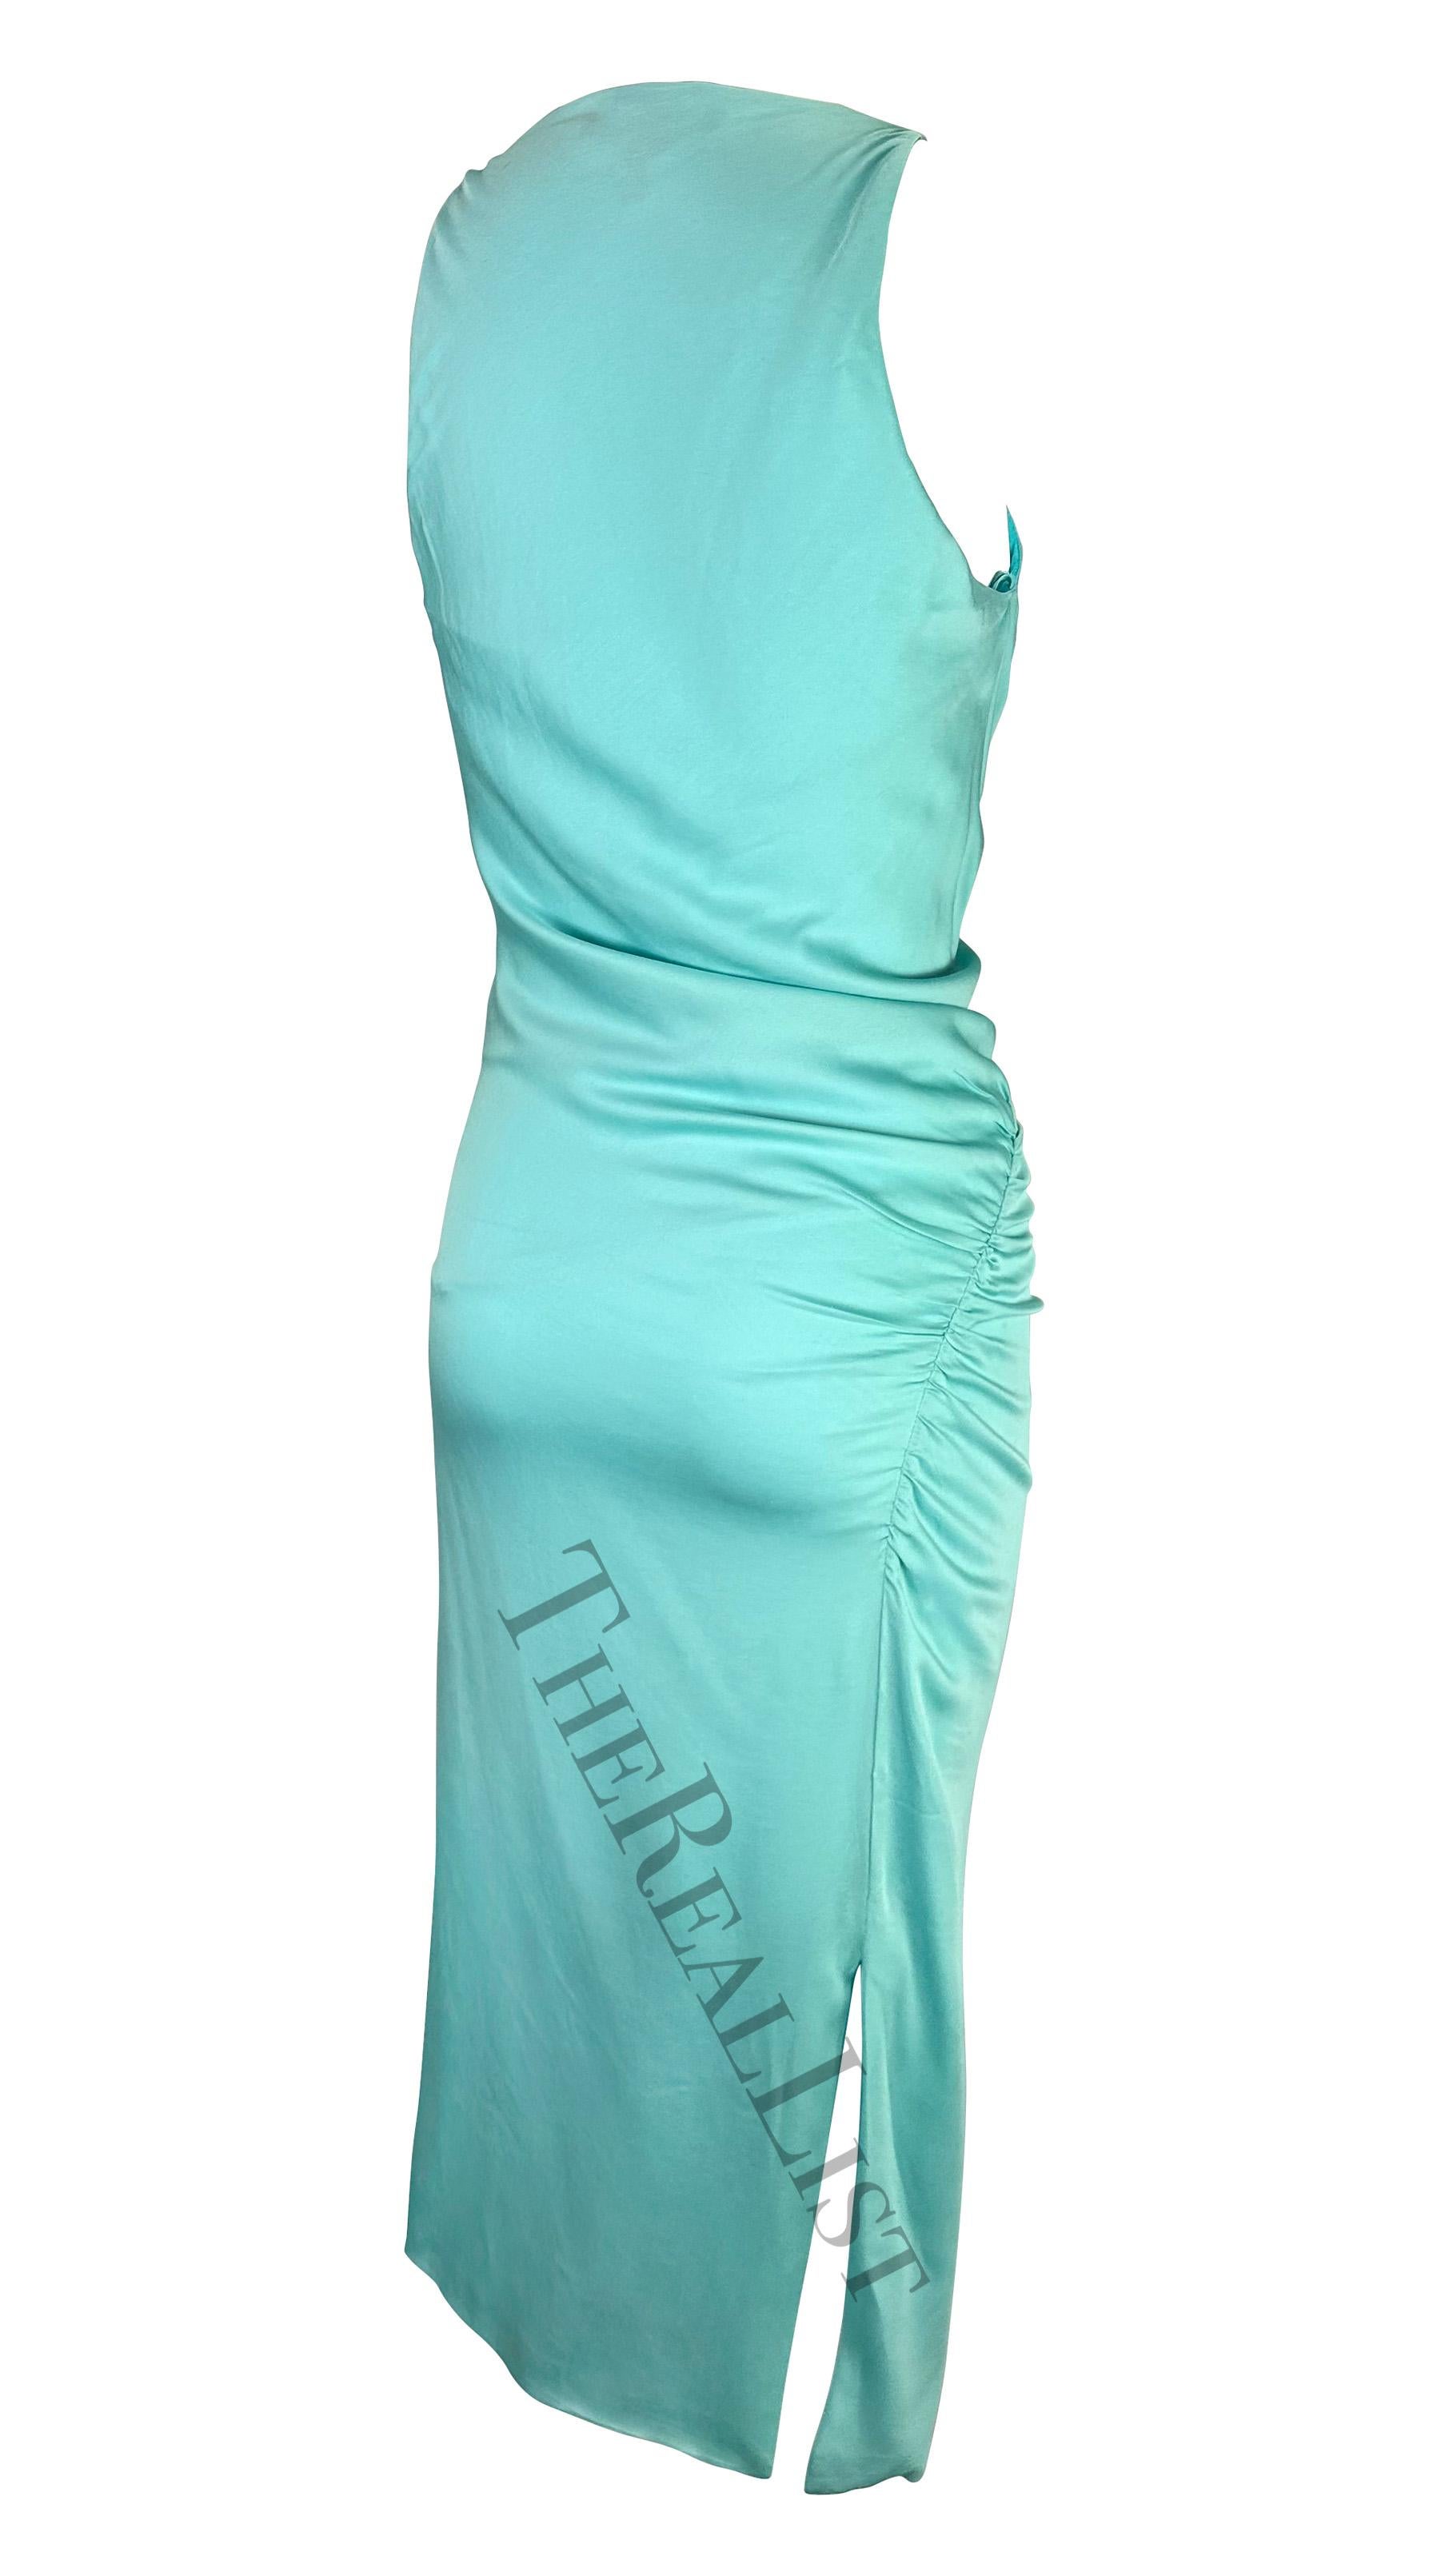 S/S 2001 Gucci by Tom Ford Baby Blue Ruched Sleeveless Dress For Sale 1